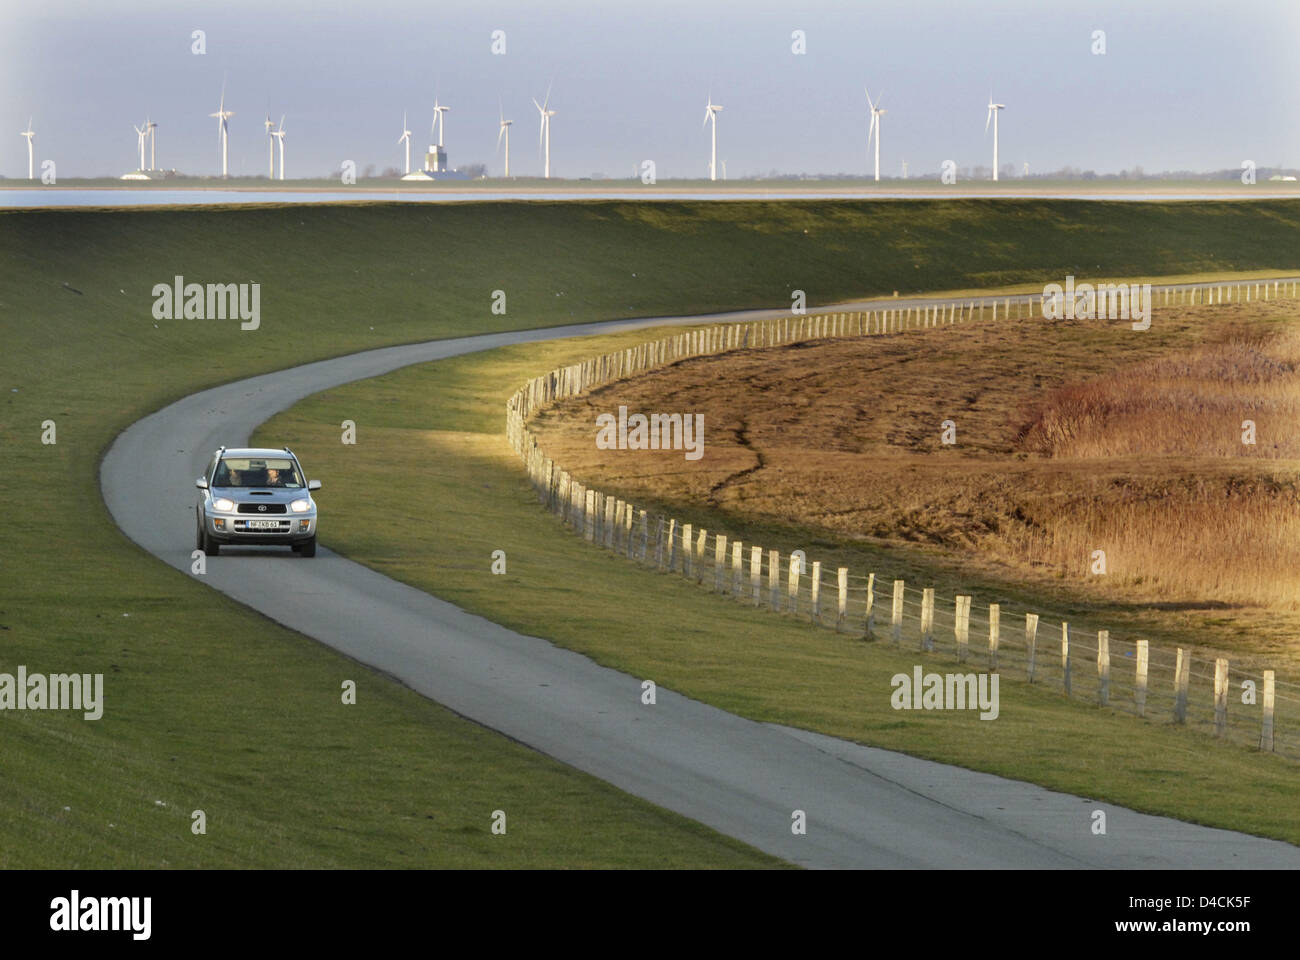 A car passes around the Beltringharder Polder, Germany, 27 November 2007. The 'Beltringharder Polder', built in 1987 as one of the most disputed dyke construction in German history, celebrates its 20th anniversary. Today, more than 10,000 pairs of birds nest and hatch there, among them 94 species of the Red List. Photo: Christian Hager Stock Photo